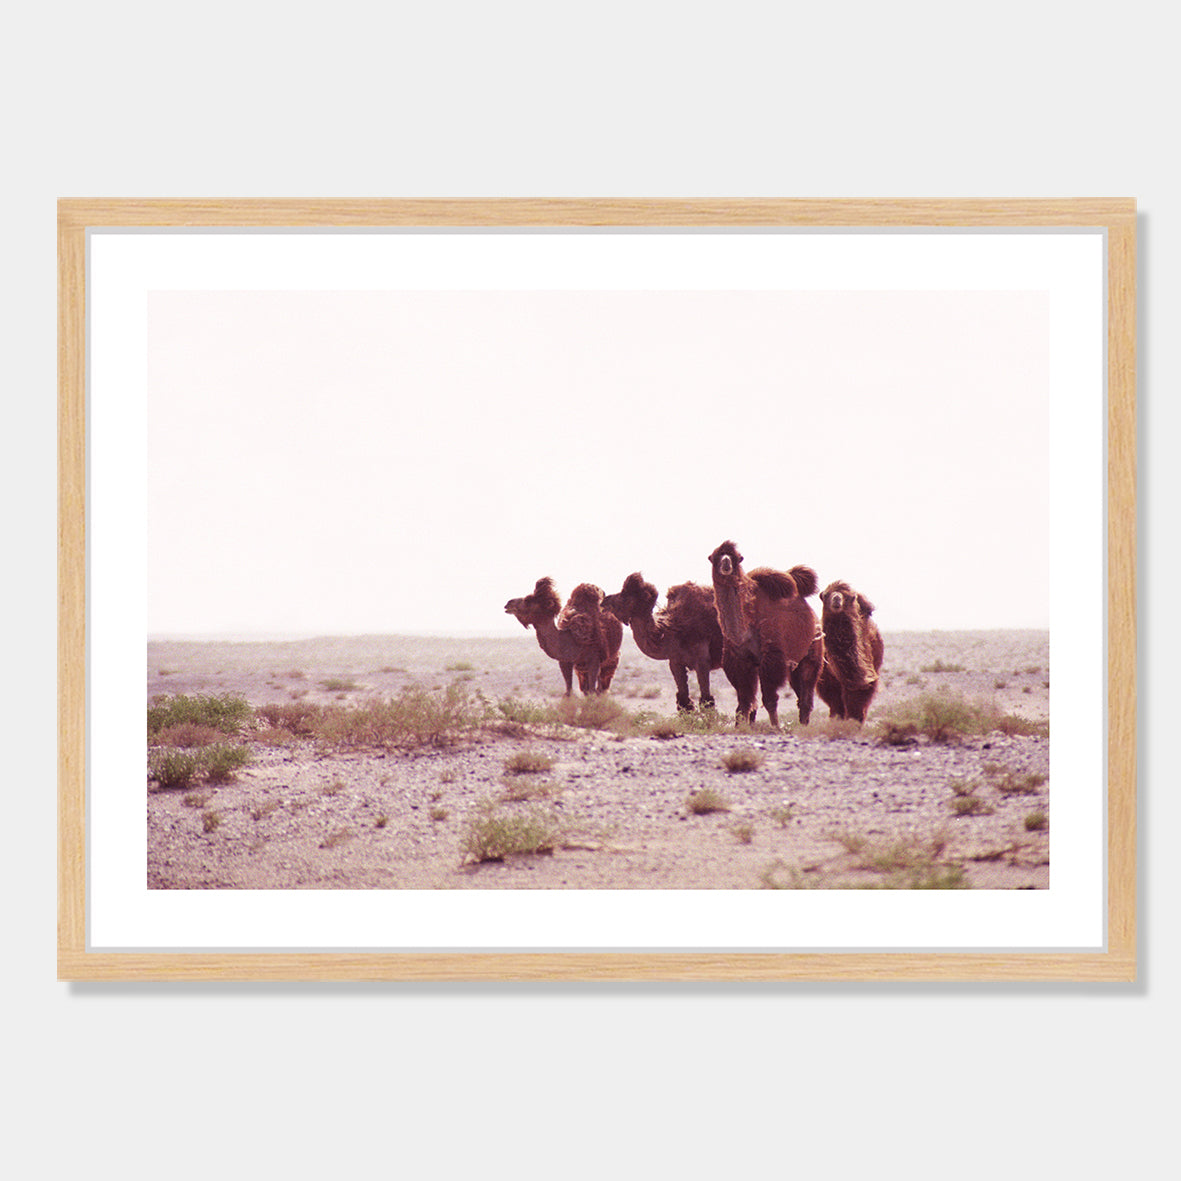 Photographic art print of Camels in the Gobi Desert, China by Bon Jung. Printed in New Zealand by endemicworld framed in raw oak.